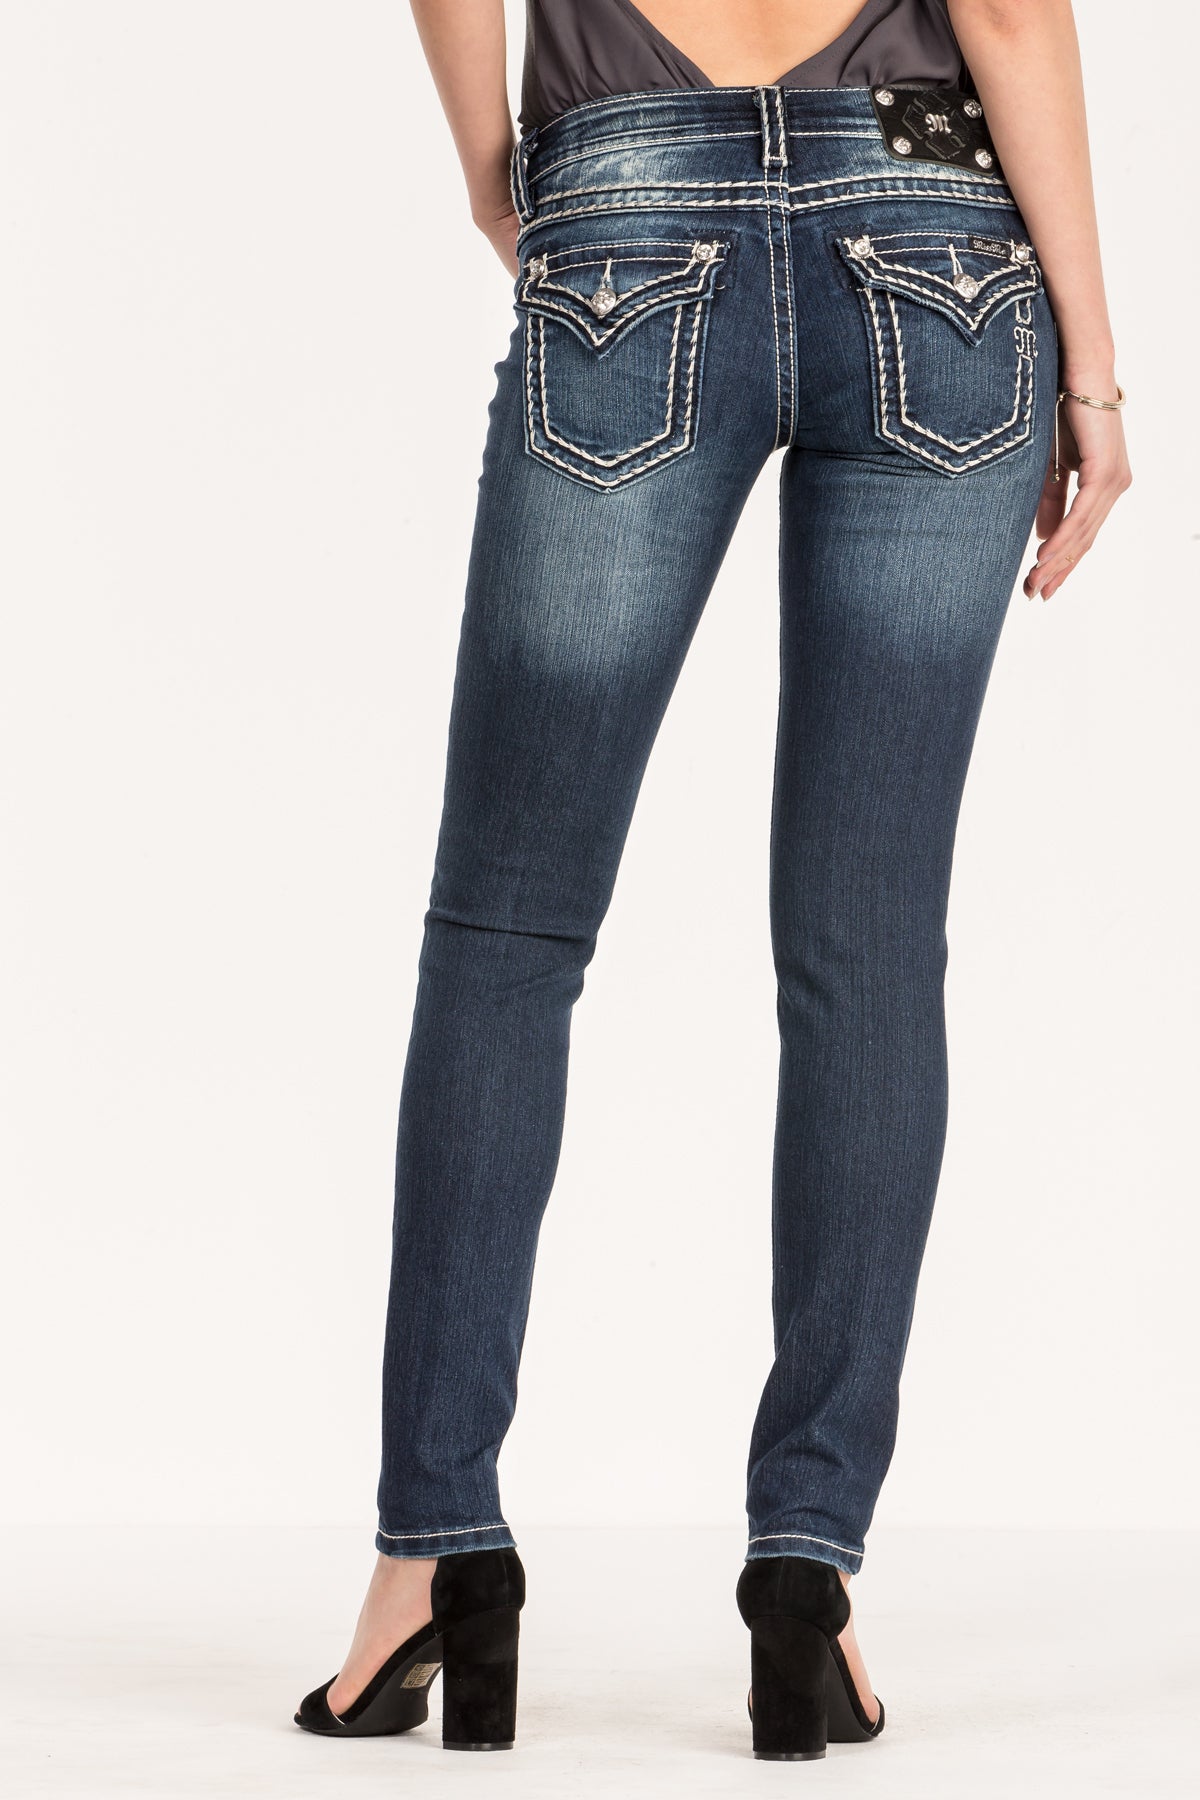 Top 56+ low rise skinny jeans best